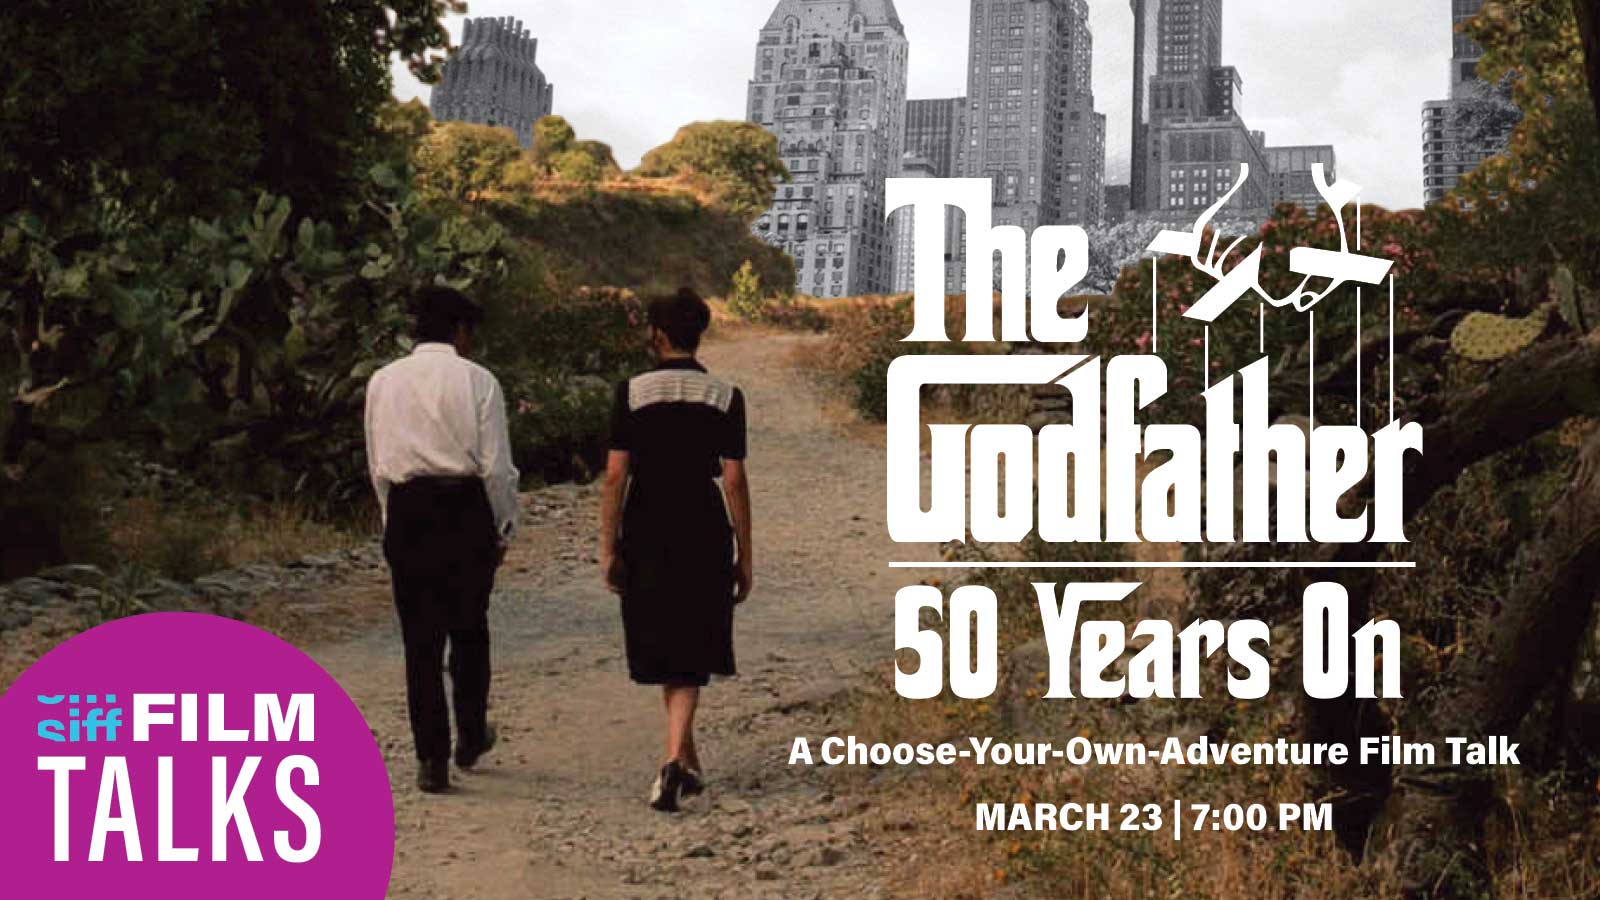 The Godfather, 50 Years On: A Choose-Your-Own-Adventure Film Talk